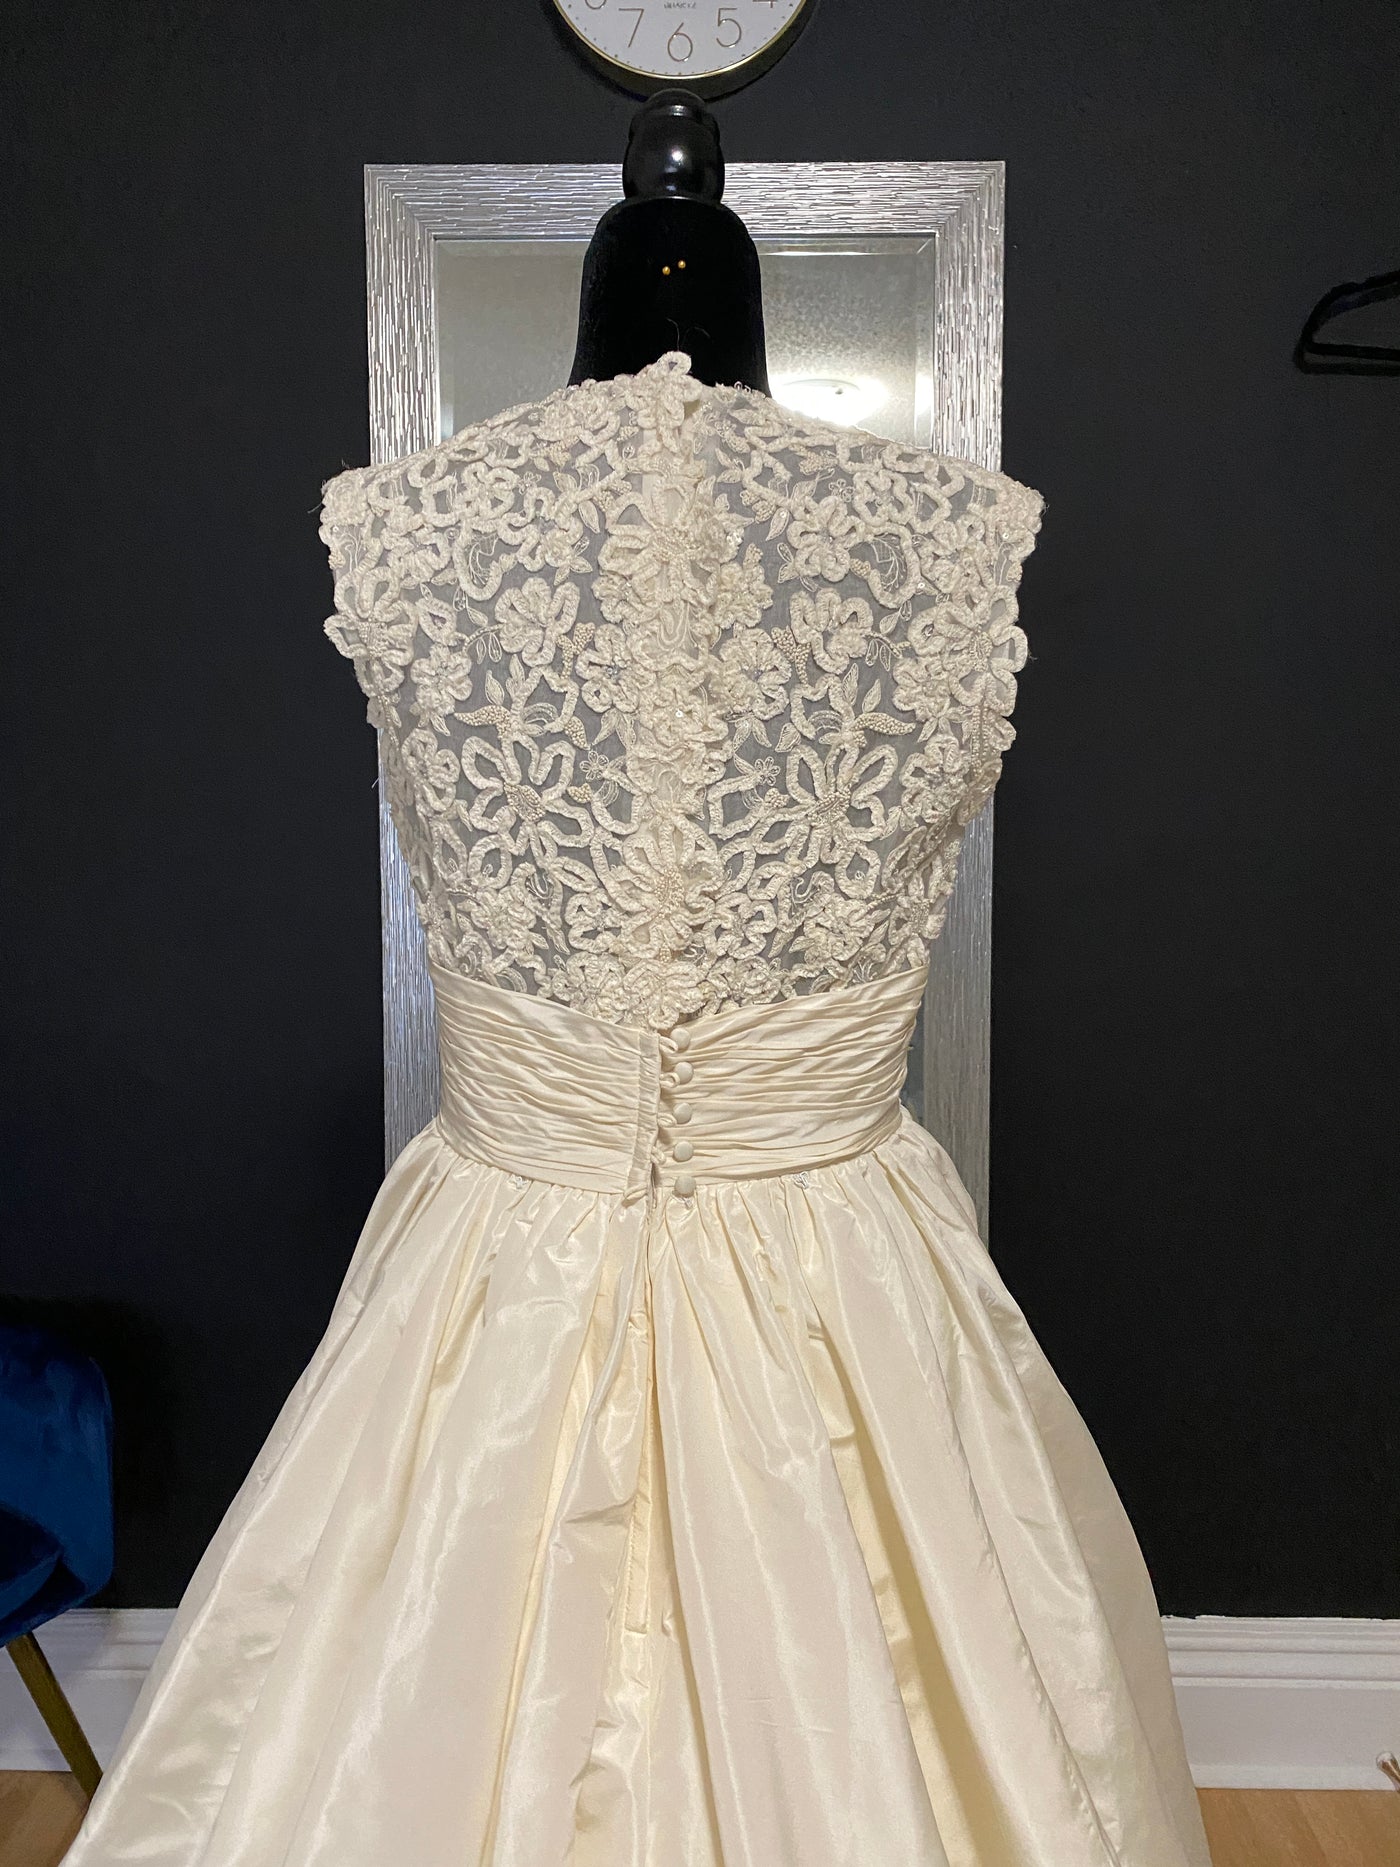 An elegant ivory Bergamot Bridal "Escalante" bridal gown with detailed lace bodice and gathered satin skirt on a mannequin against a dark wall with a clock above.